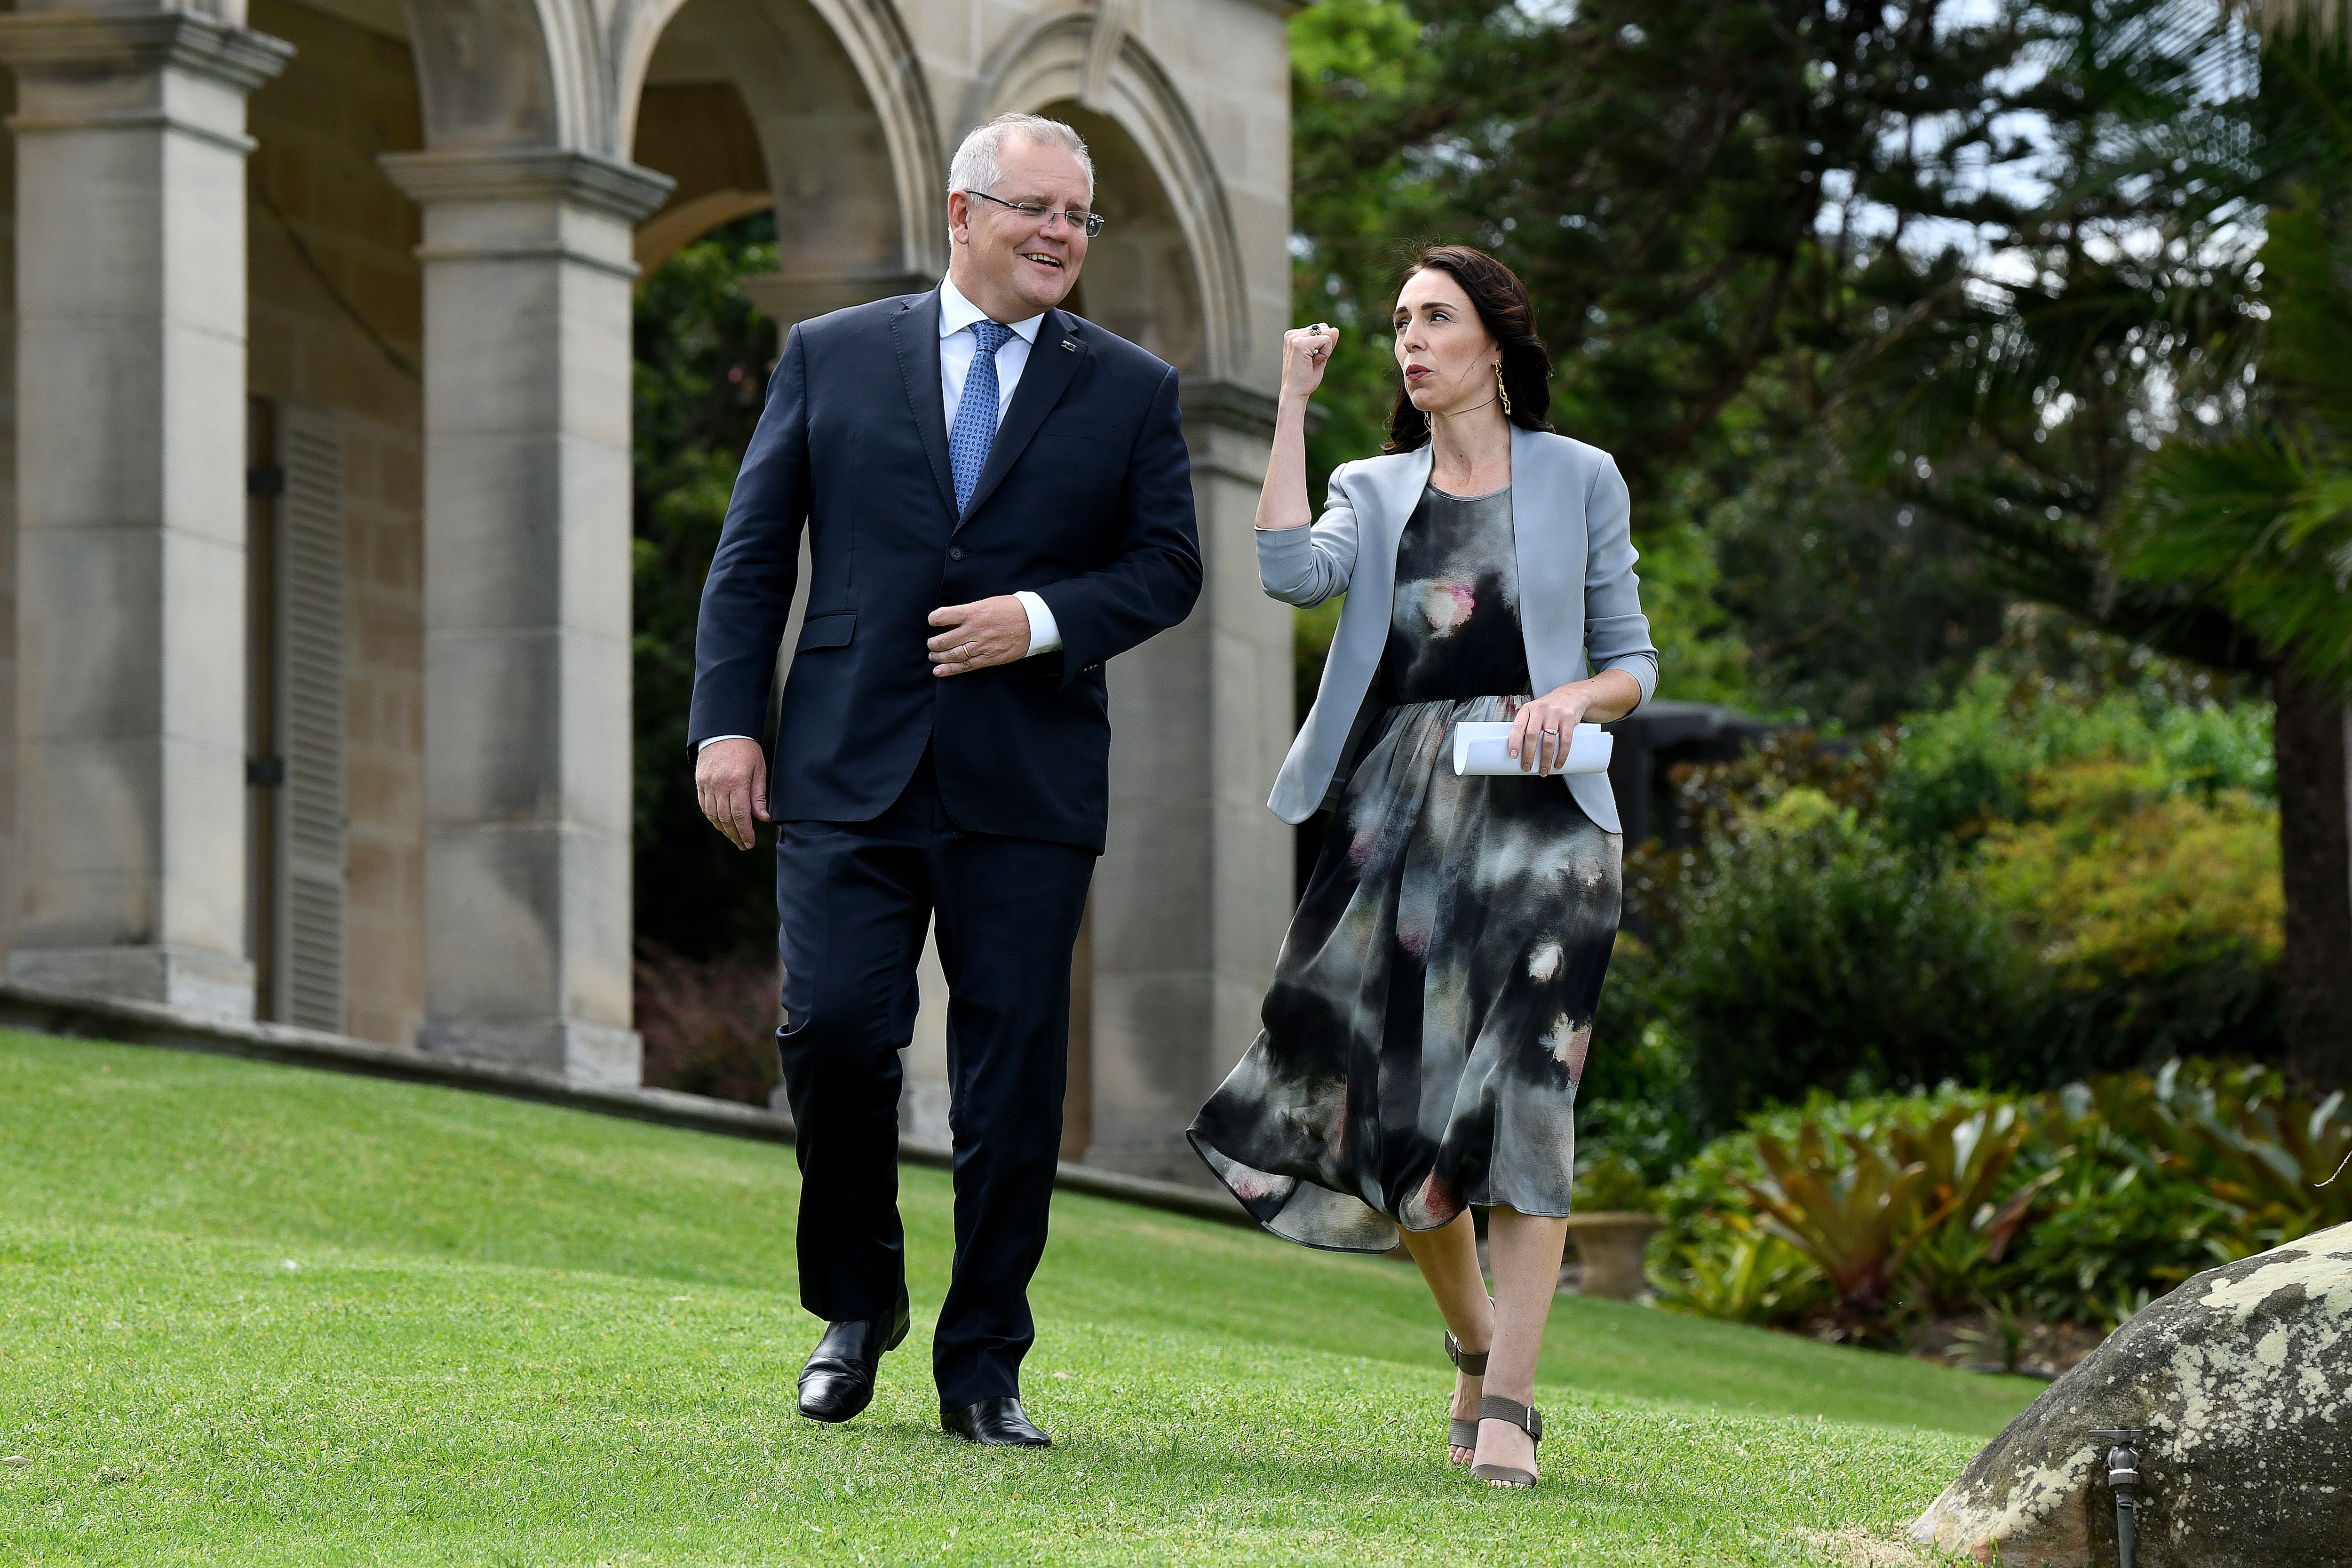 New Zealand Prime Minister Jacinda Ardern on a visit to Sydney in February 2020